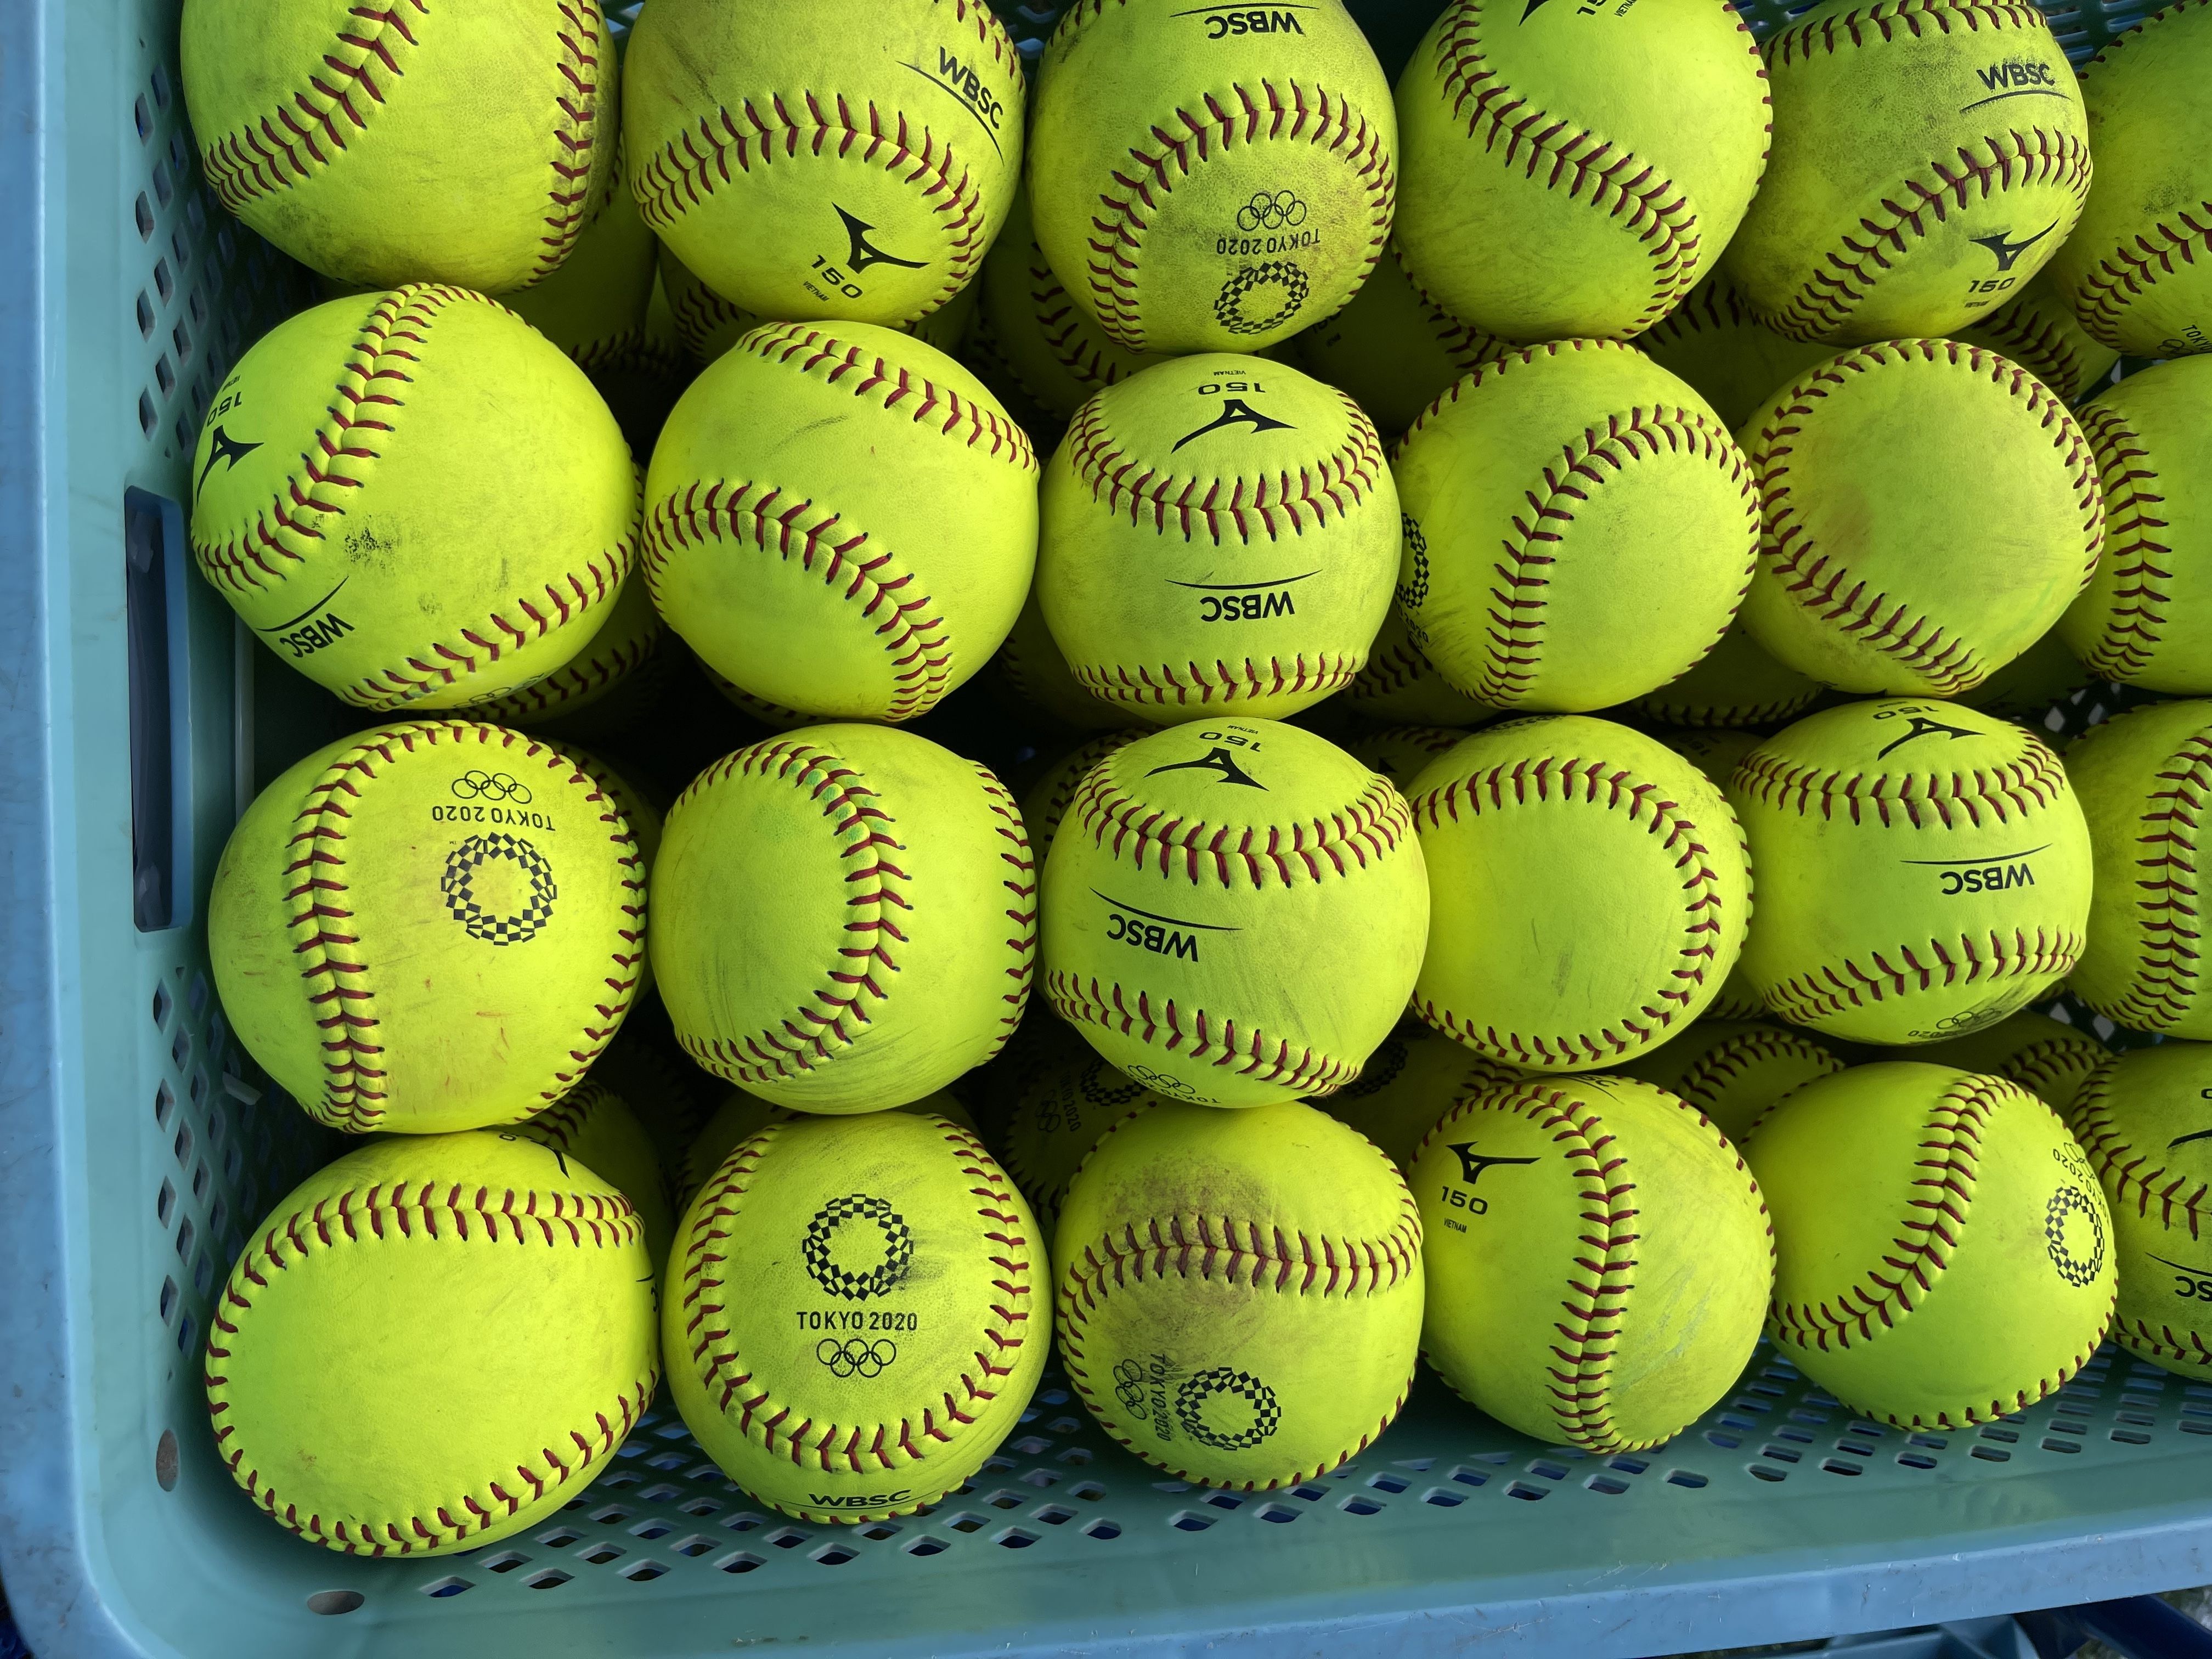 A bucket of softballs used during the Tokyo Olympics